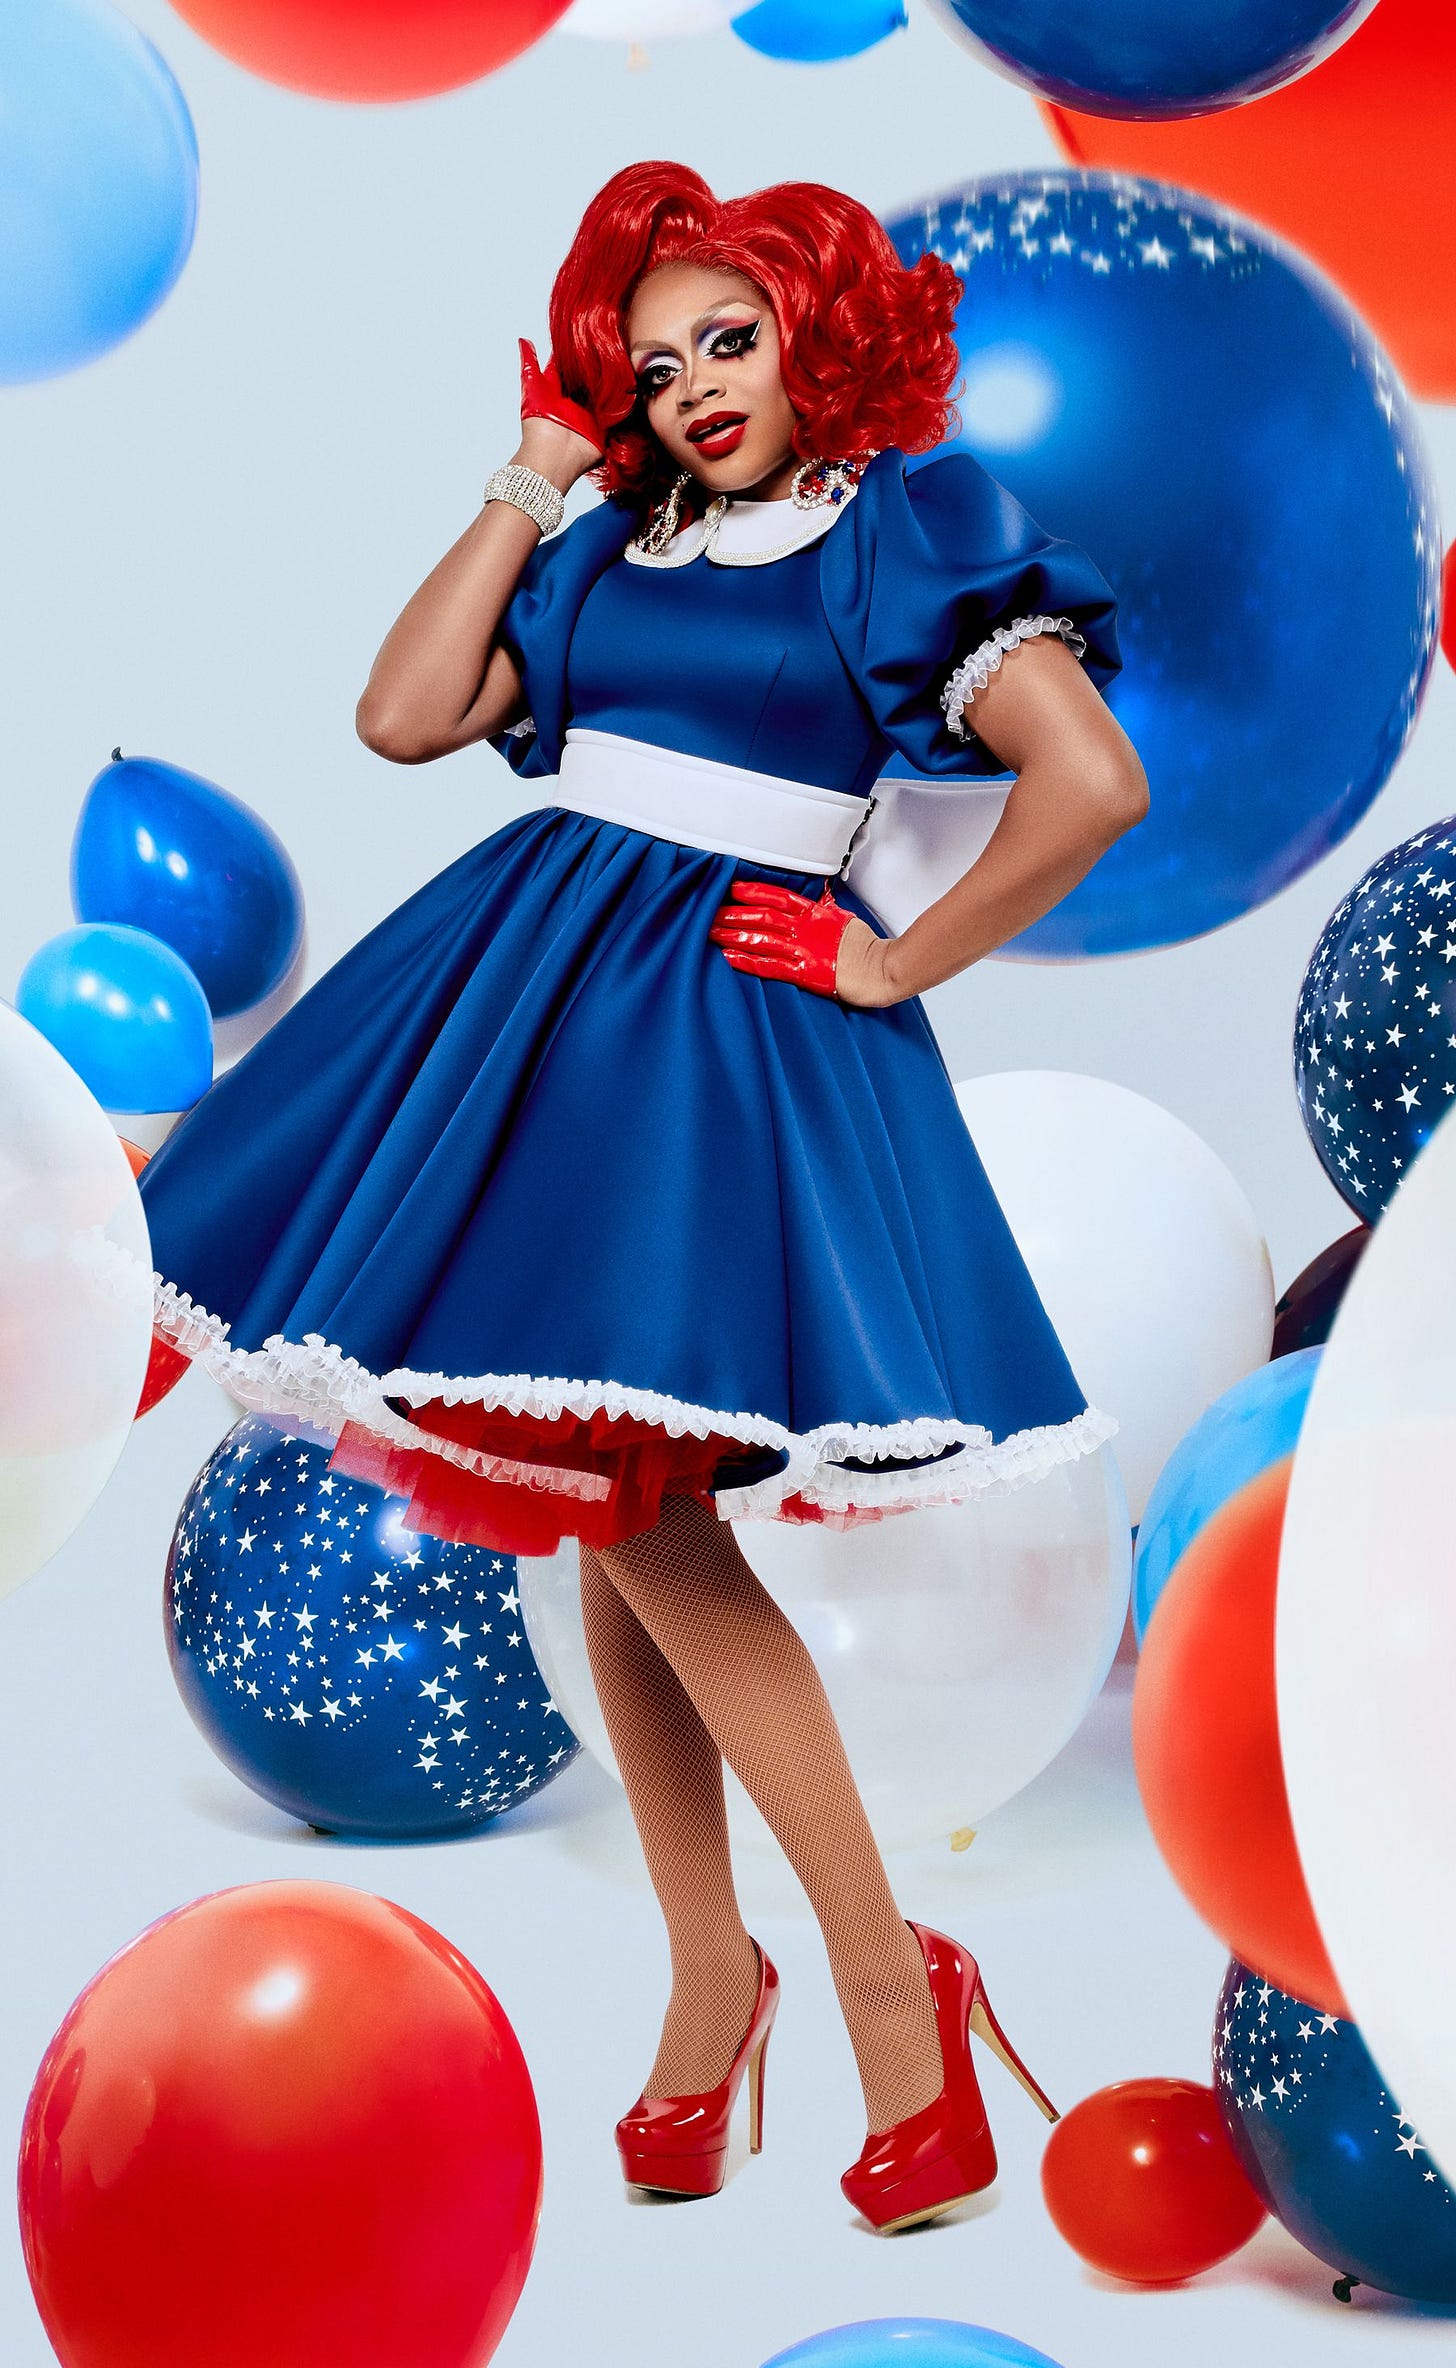 A staged promotional photo of Heidi N Closet. She wears a red wig, a blue dress with puffy sleeves and a white sash with red high heels. The effect is very reminiscent of the American flag. She poses with one hand on her hip and the other in her hair, with a confident expression on her face.